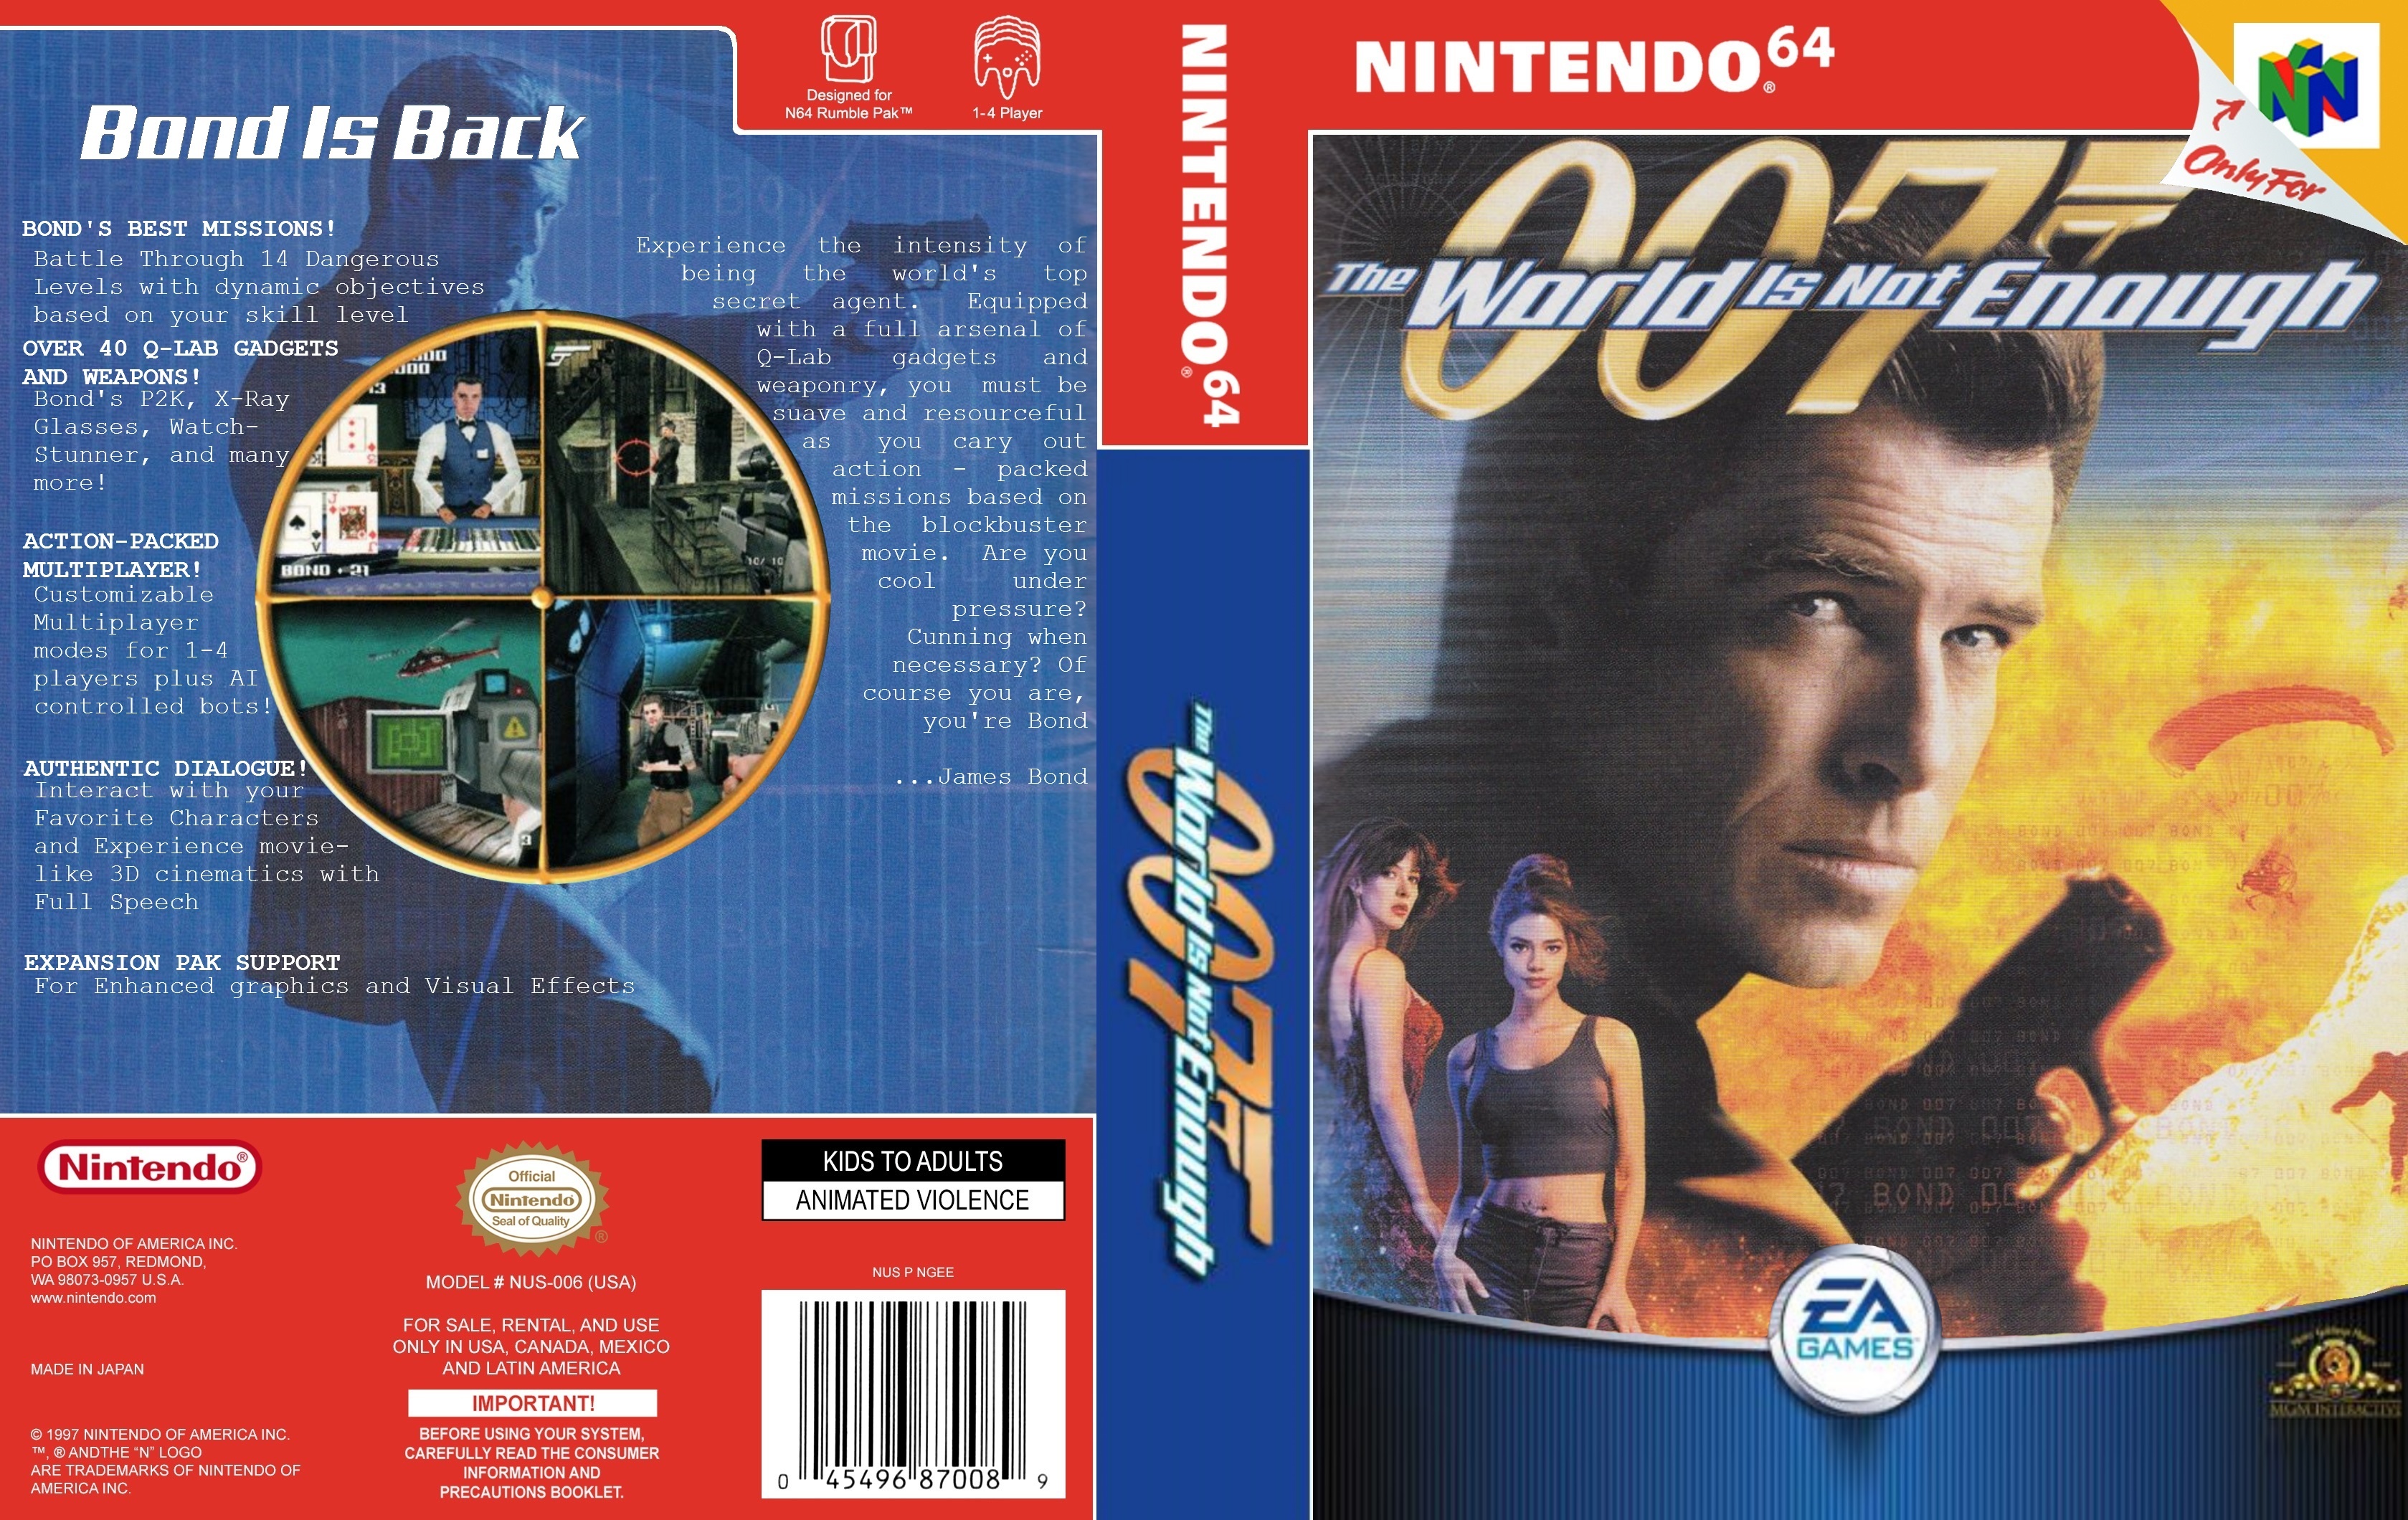 007 The World Is Not Enough box cover